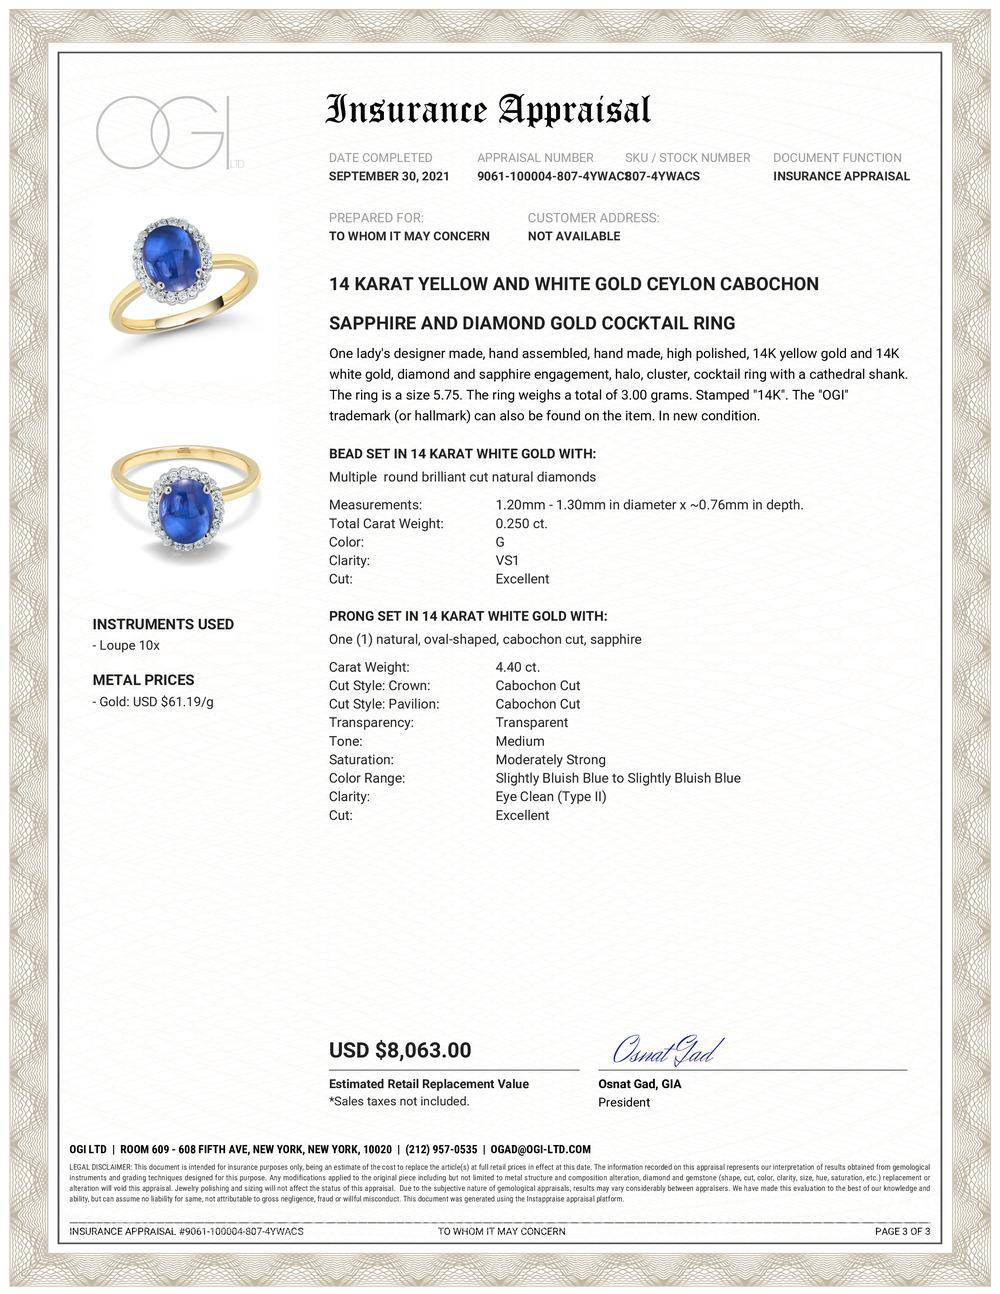 Fourteen karats two-tone yellow and white gold ring
Fine quality, bright and ocean blue Ceylon cabochon sapphire weighing 4.40 carat     
Ceylon sapphires were originally famous for their vibrant medium blue, yellow, and pink hues. ending supply of